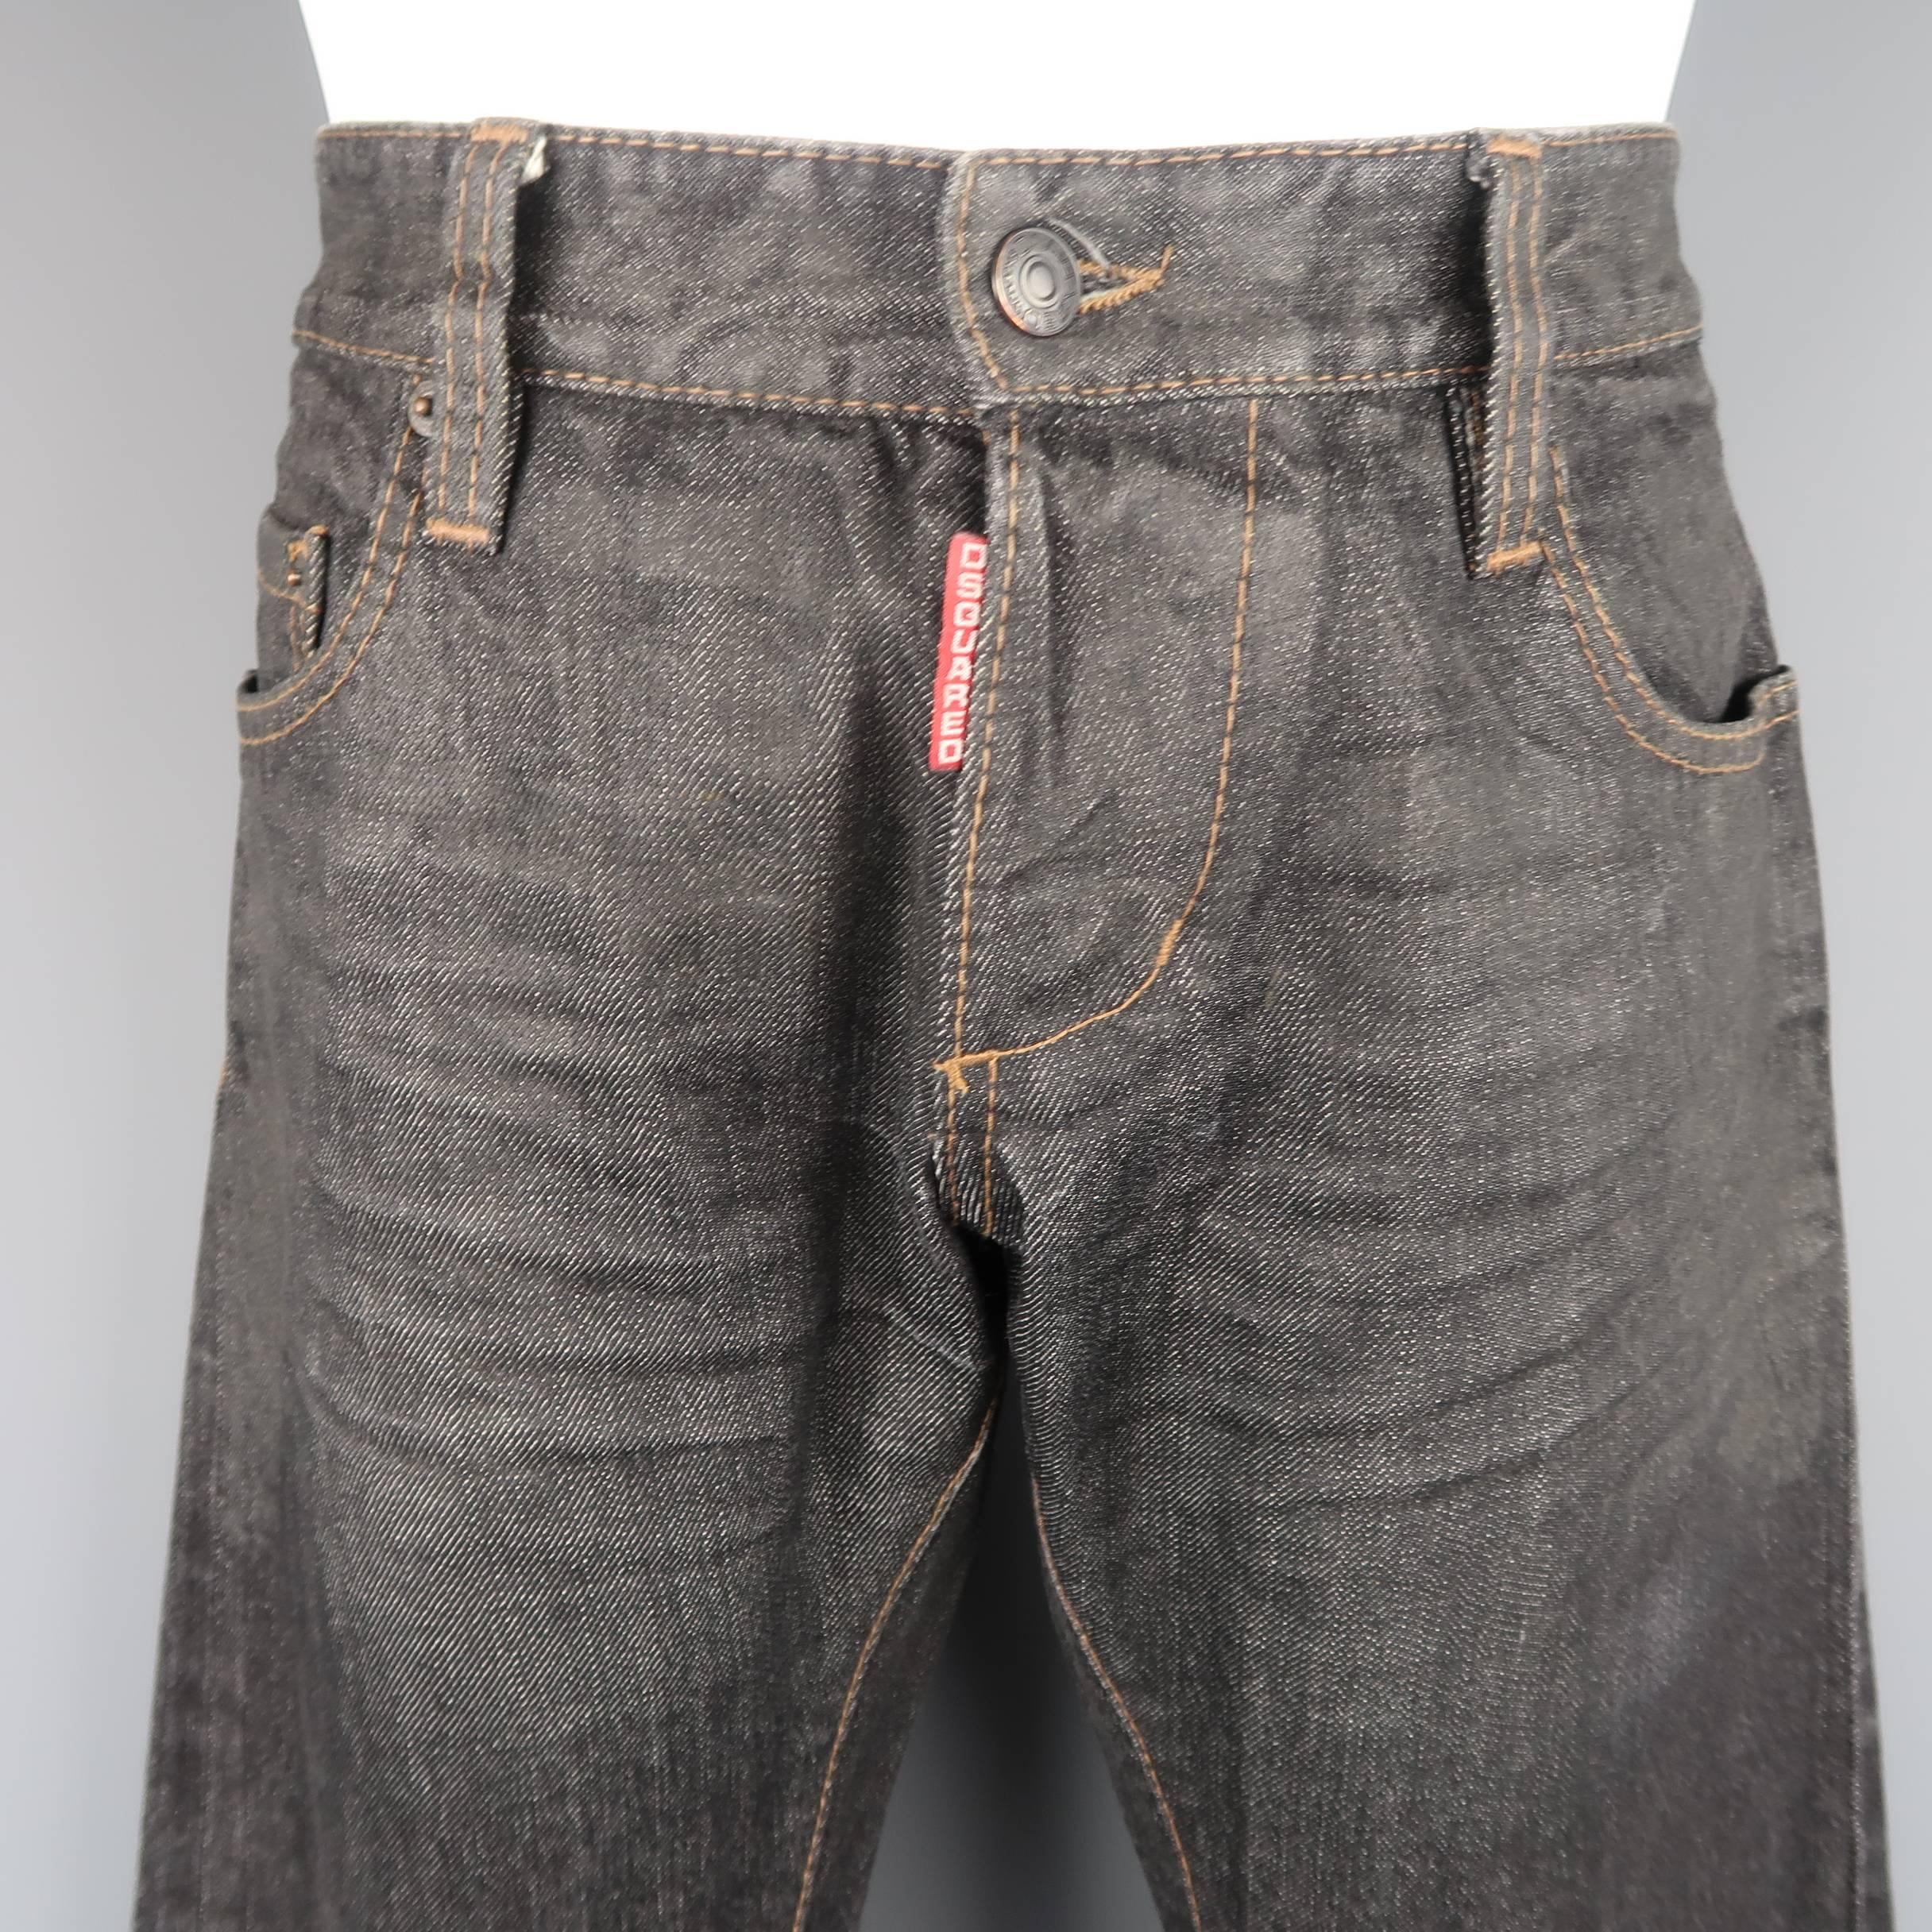 DSQUARED2 jeans come in charcoal raw selvedge denim with a red logo tab fly, distressed wax coated effect top, and permanent cuffed hem. Made in Italy.
 
Good Pre-Owned Condition.
Marked: IT 48
 
Measurements:
 
Waist: 34 in.
Rise: 8.5 in.
Inseam: